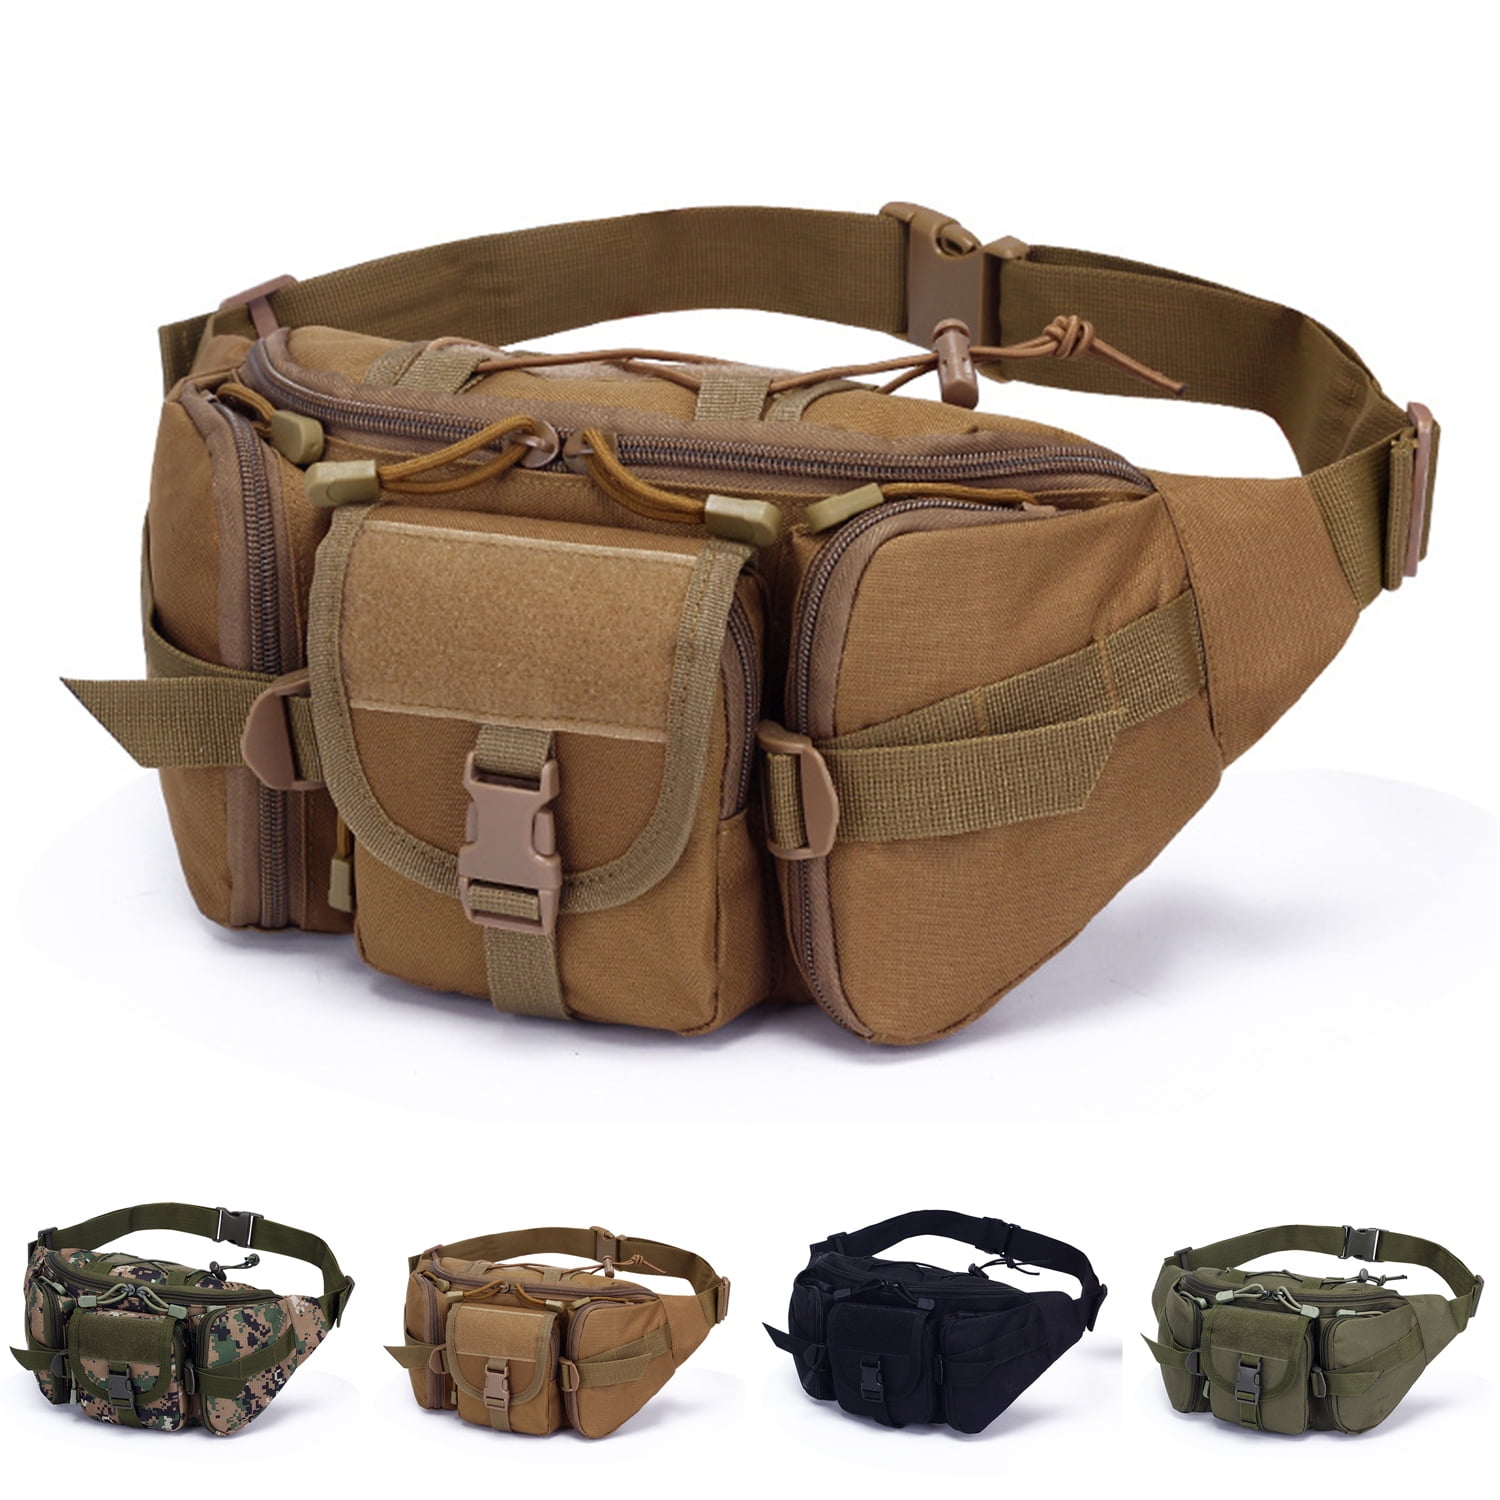  AMESEN Waterproof Military Fanny Pack Tactical Hip Bag Side  Waist Bag Pack Water-Resistant Hip Belt Pack Pouch Hiking Climbing Fishing  Outdoor(Mud)